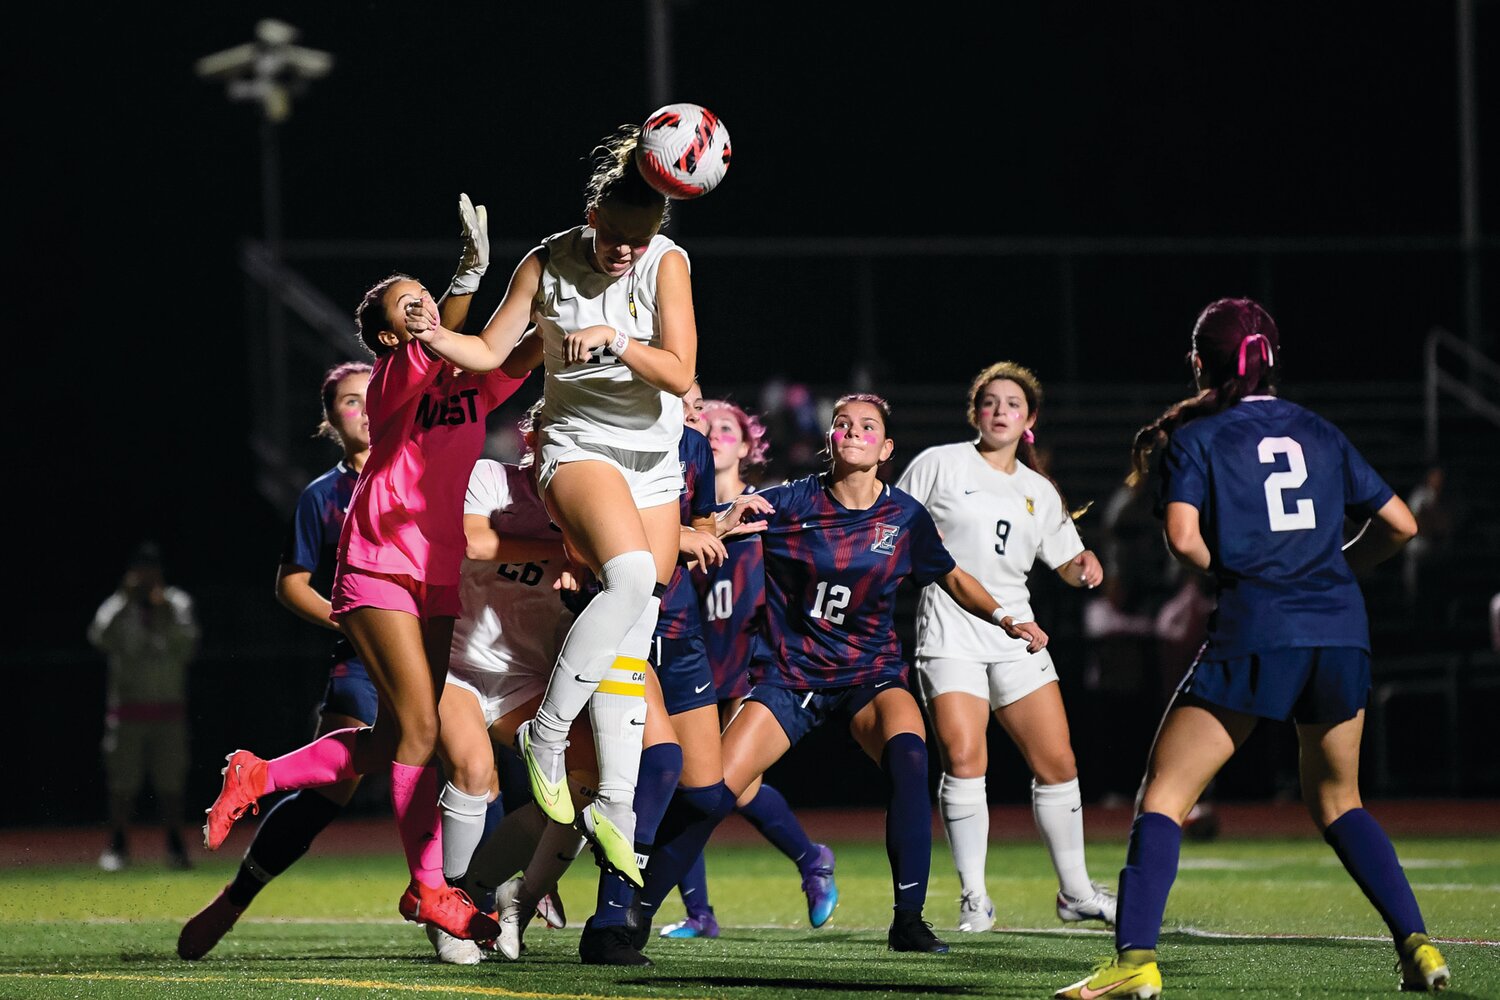 CB West’s Mackenzie Gausch clears the ball in front of the CB West goal with a header during the second half of the 0-0 tie.